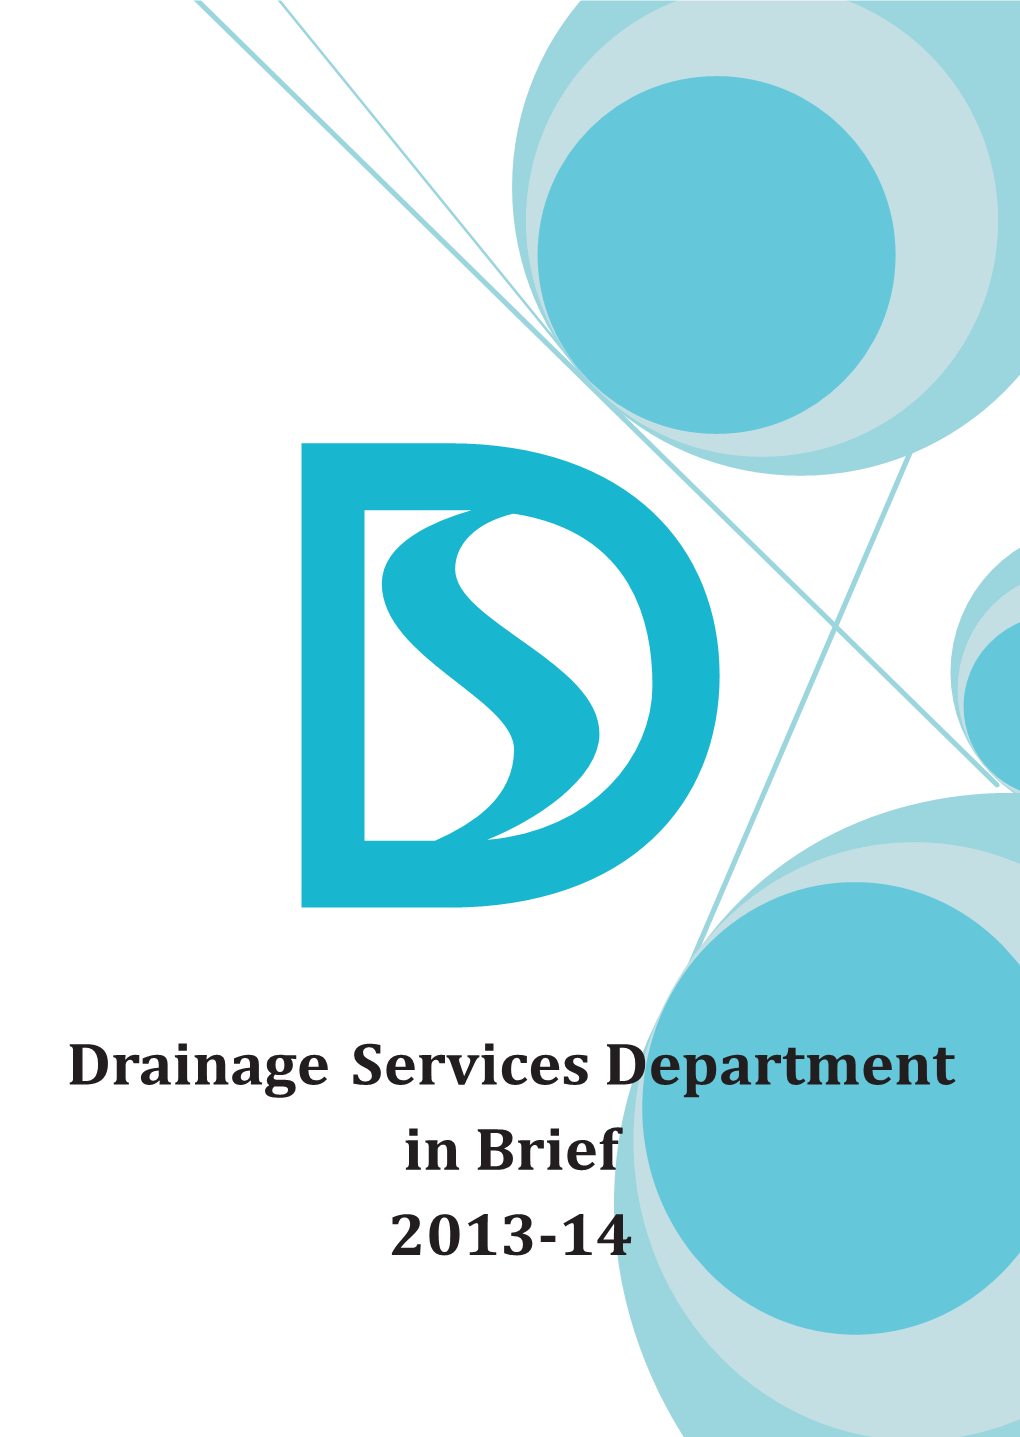 Drainage Services Department in Brief 2013-14